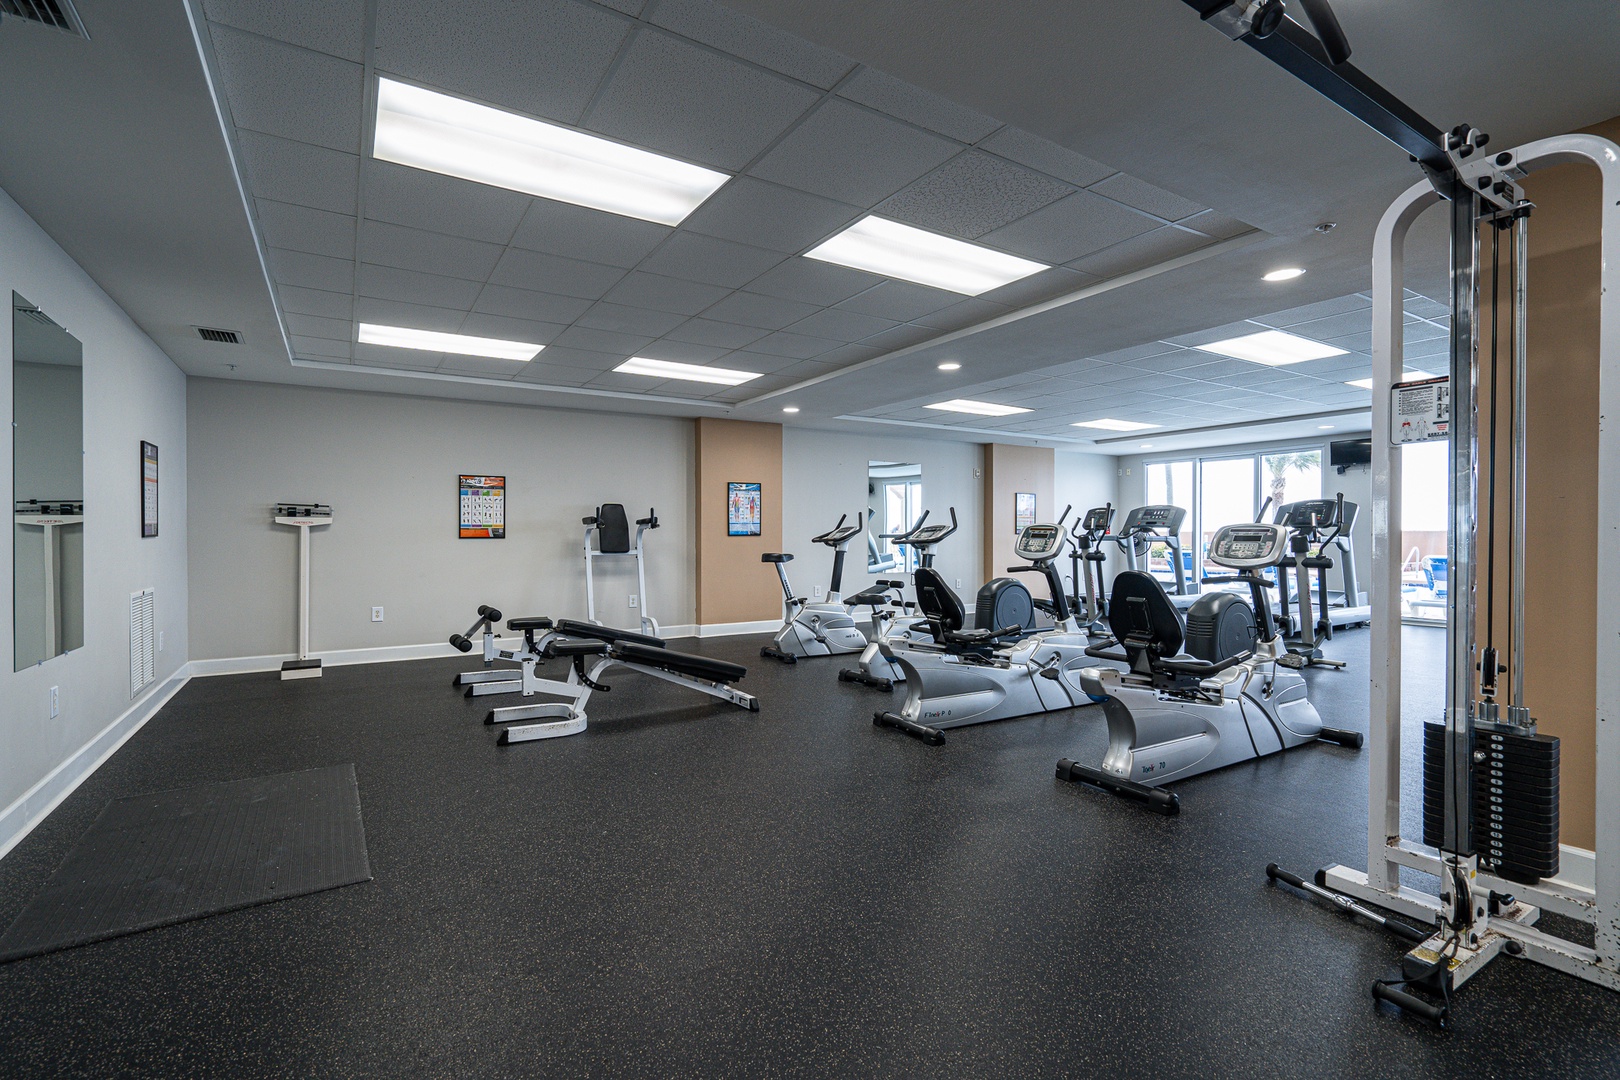 Crush your goals in the well-equipped community fitness room